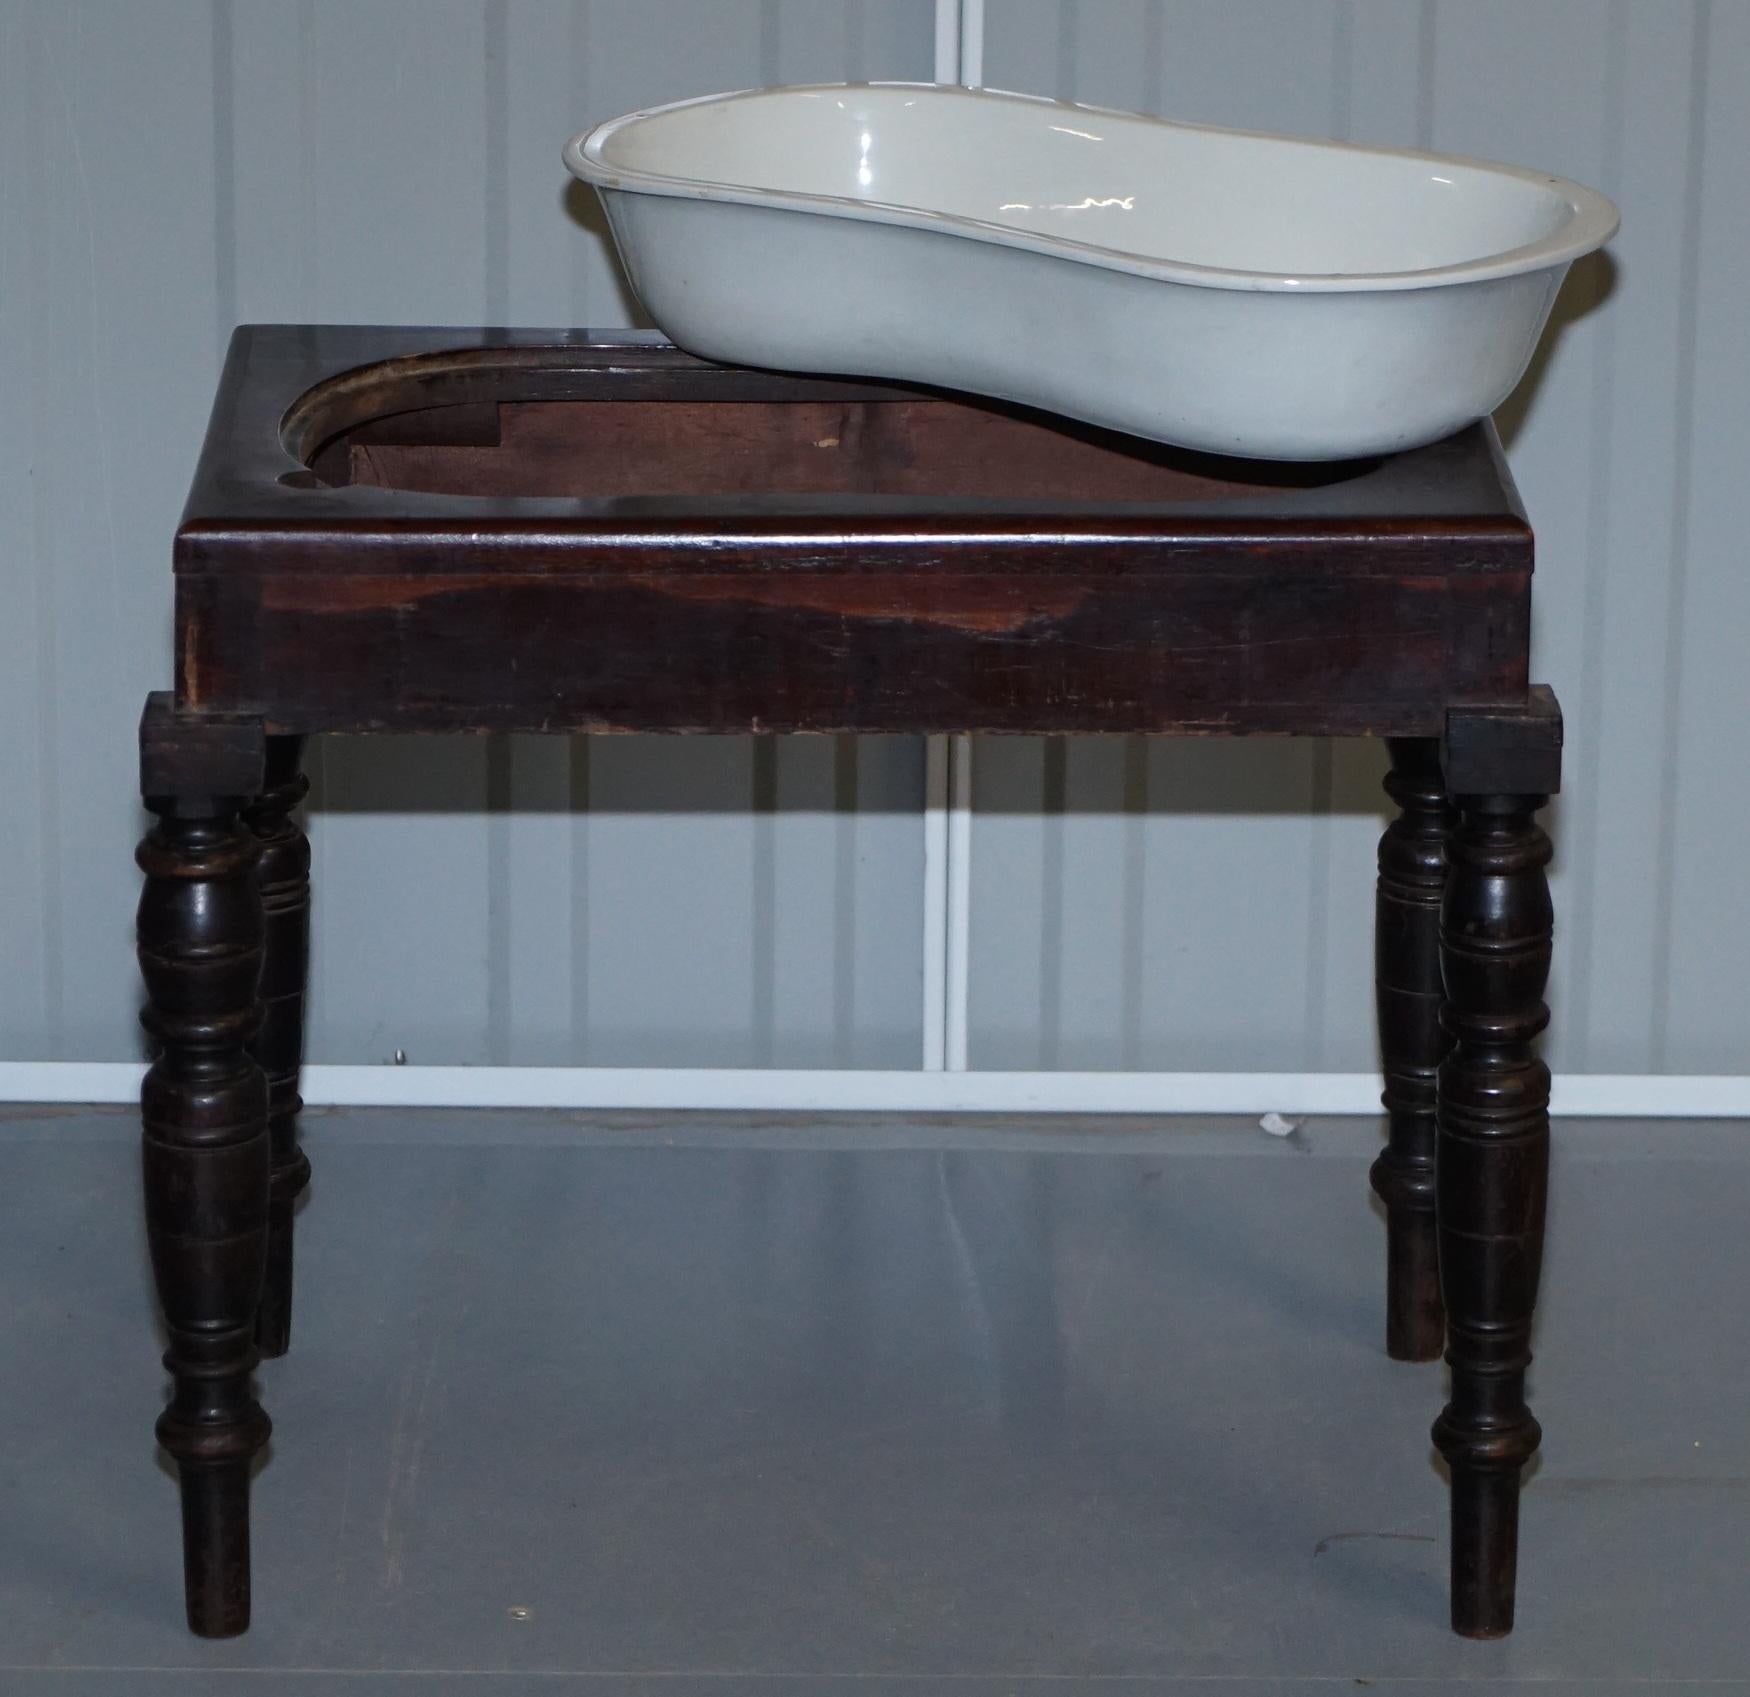 Hand-Crafted Victorian Side Table with Ceramic Stamped Porcelain Baby or Foot Bath Wash Basin